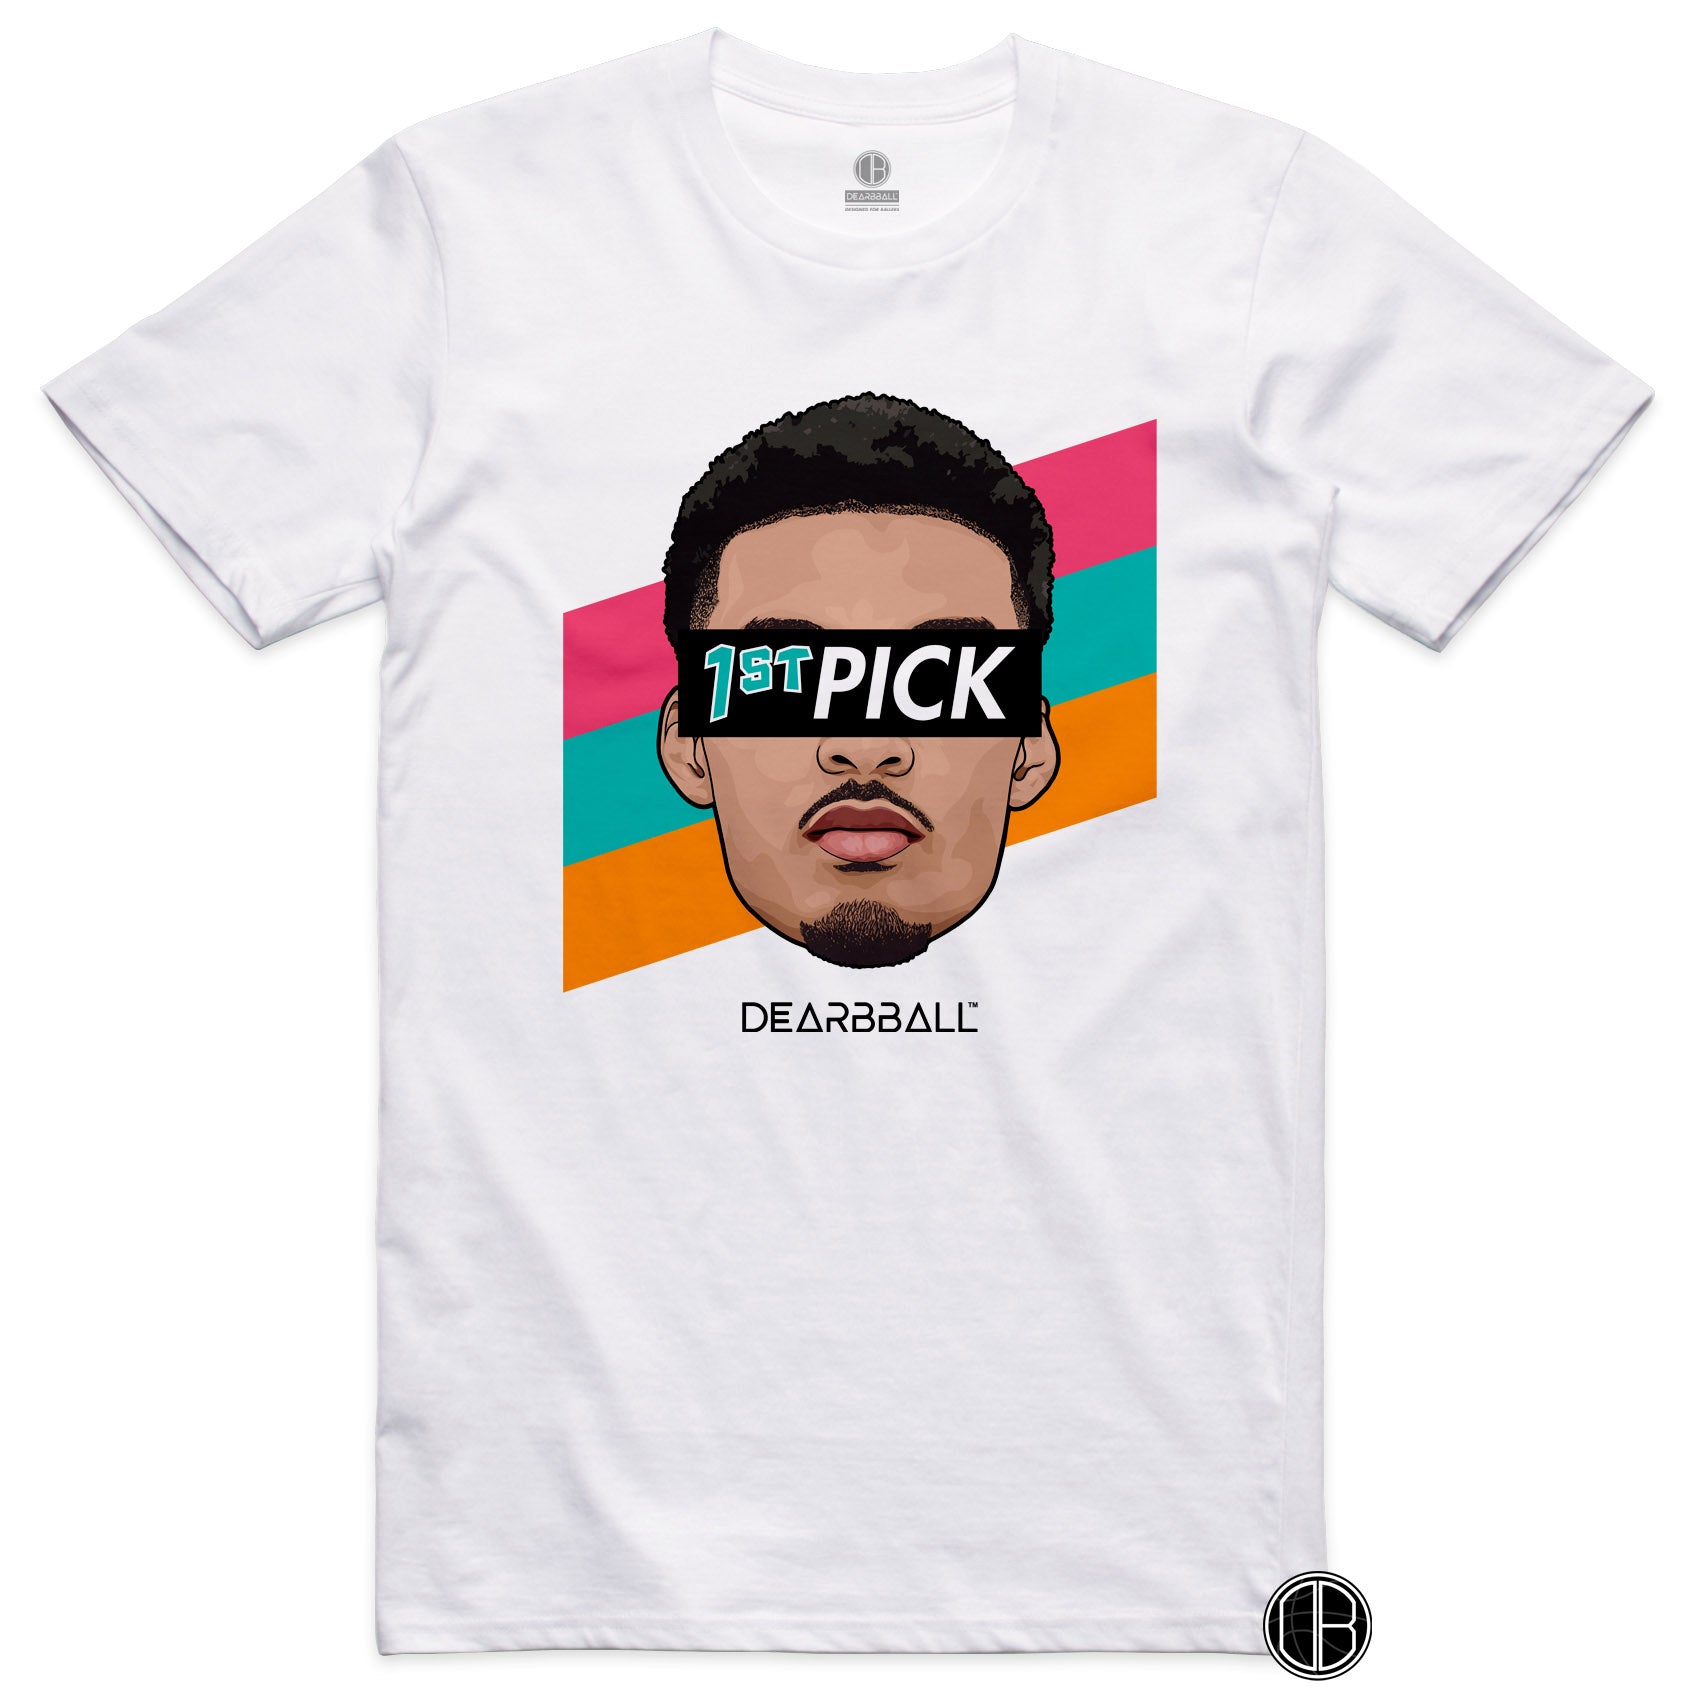 DearBBall T-Shirt - 1st PICK Edition Limited Edition